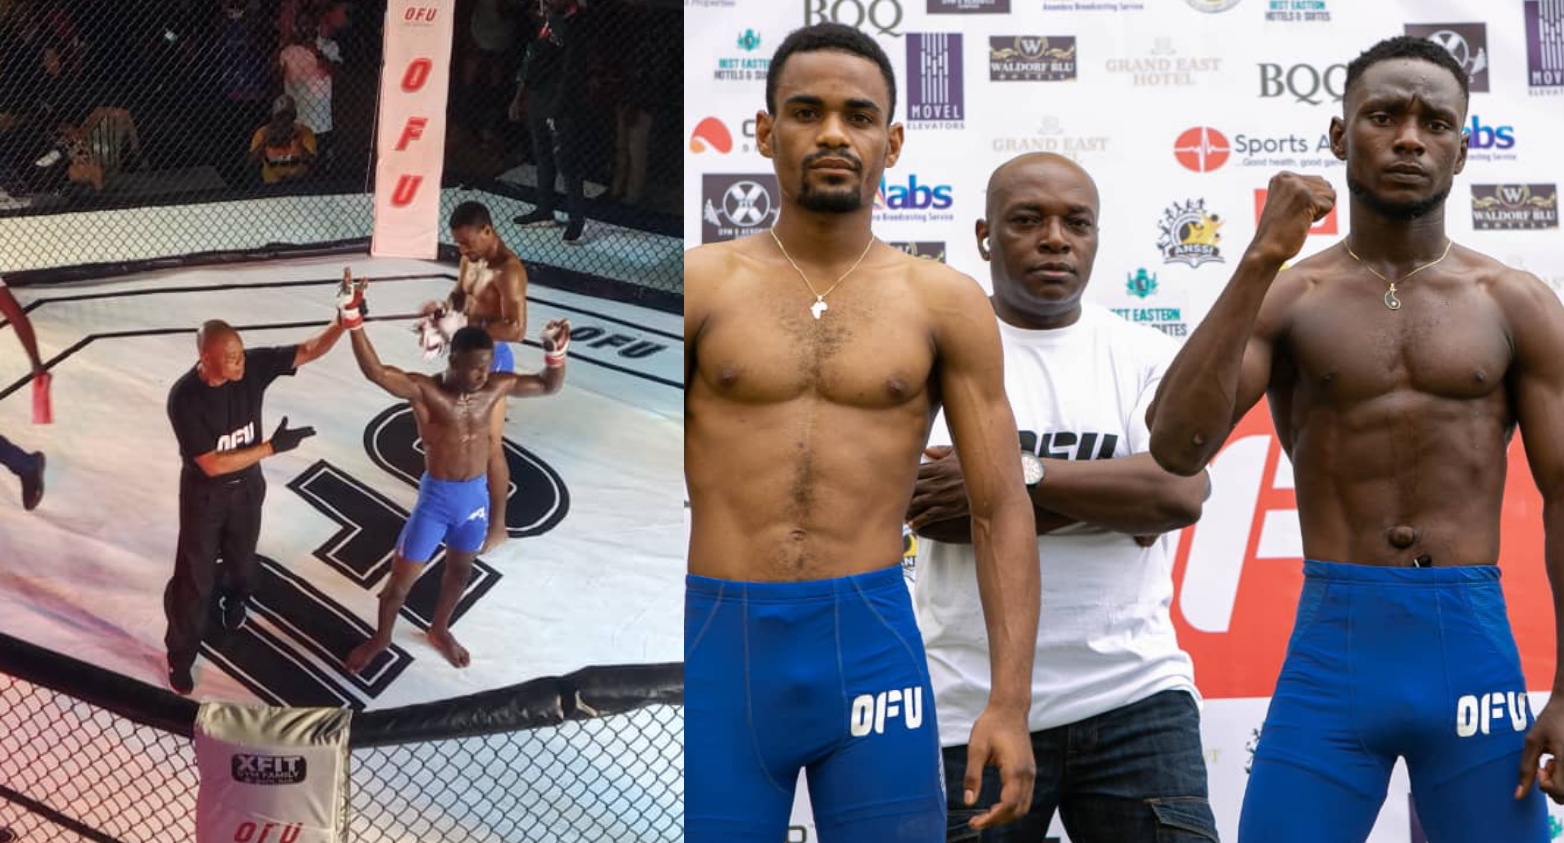 OFU Fight Night 3 Ends In Awka; Organiser Calls For Support